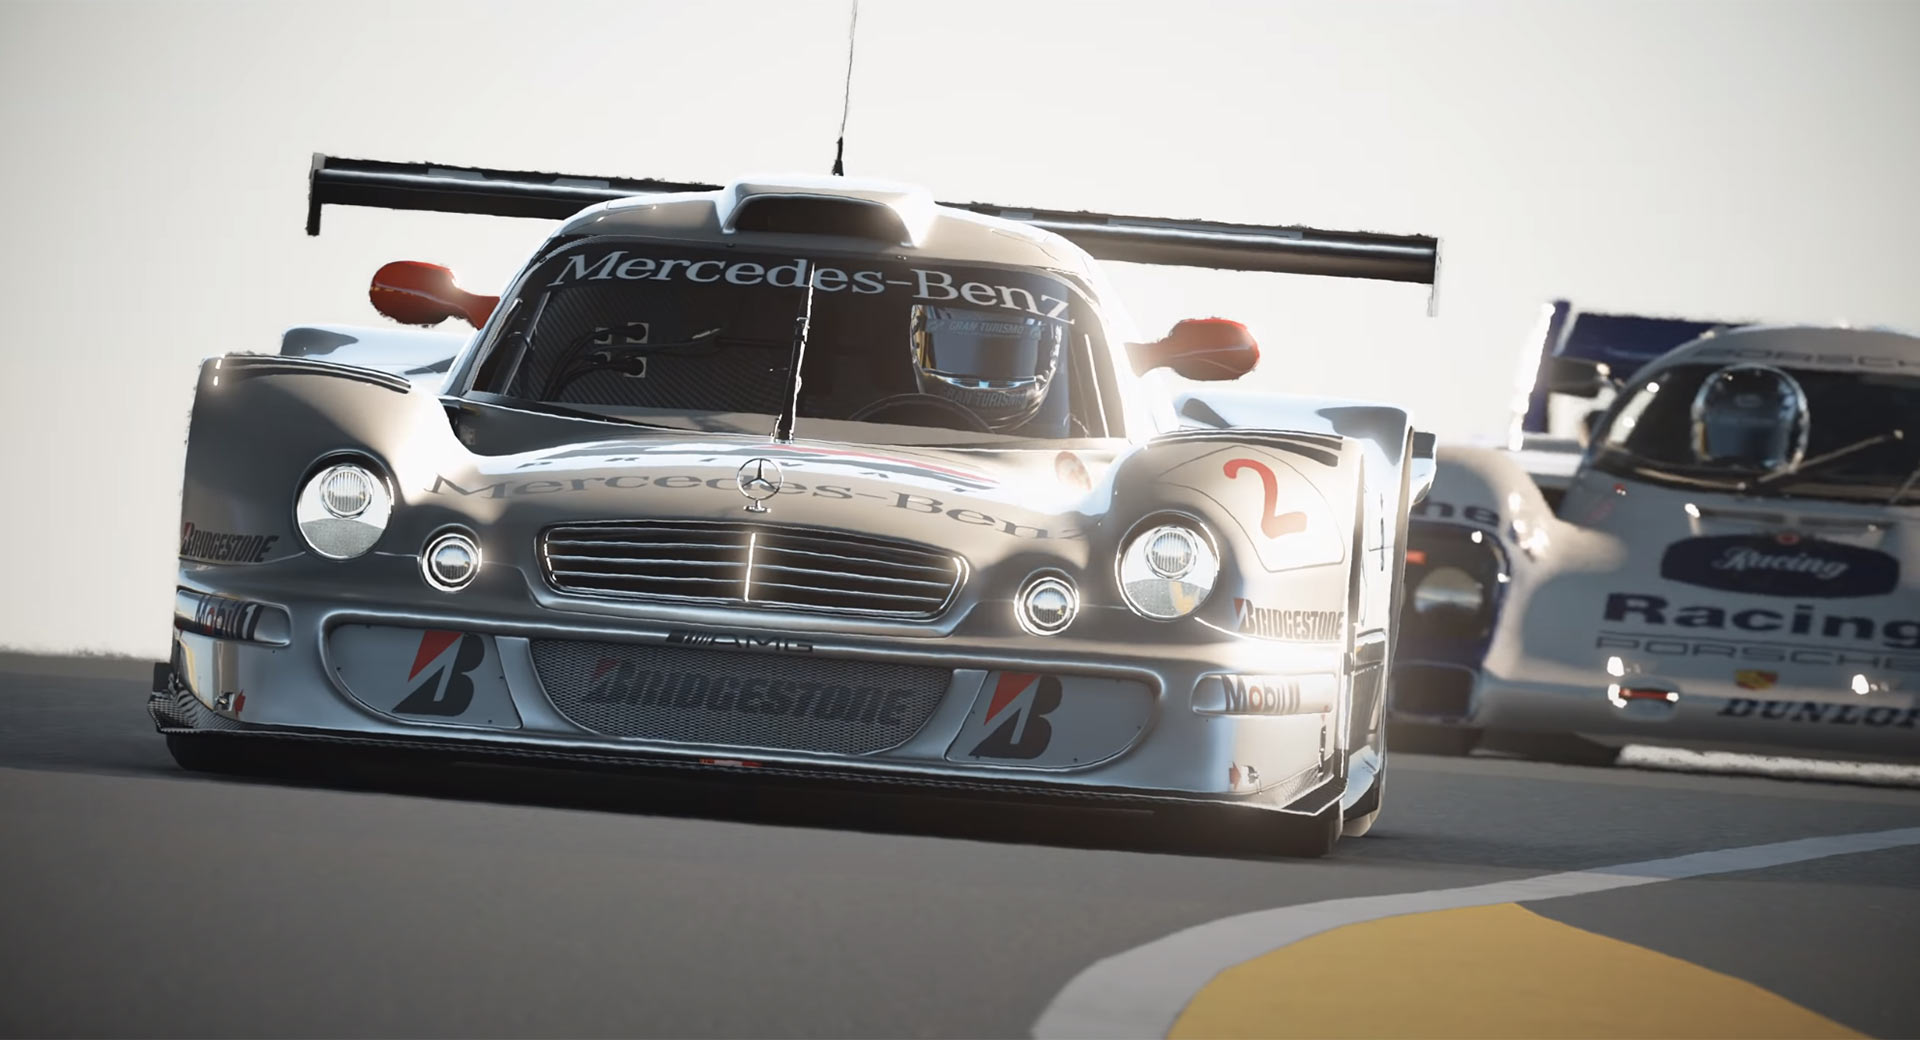 Gran Turismo 7 Confirmed to Launch on PlayStation 4 and